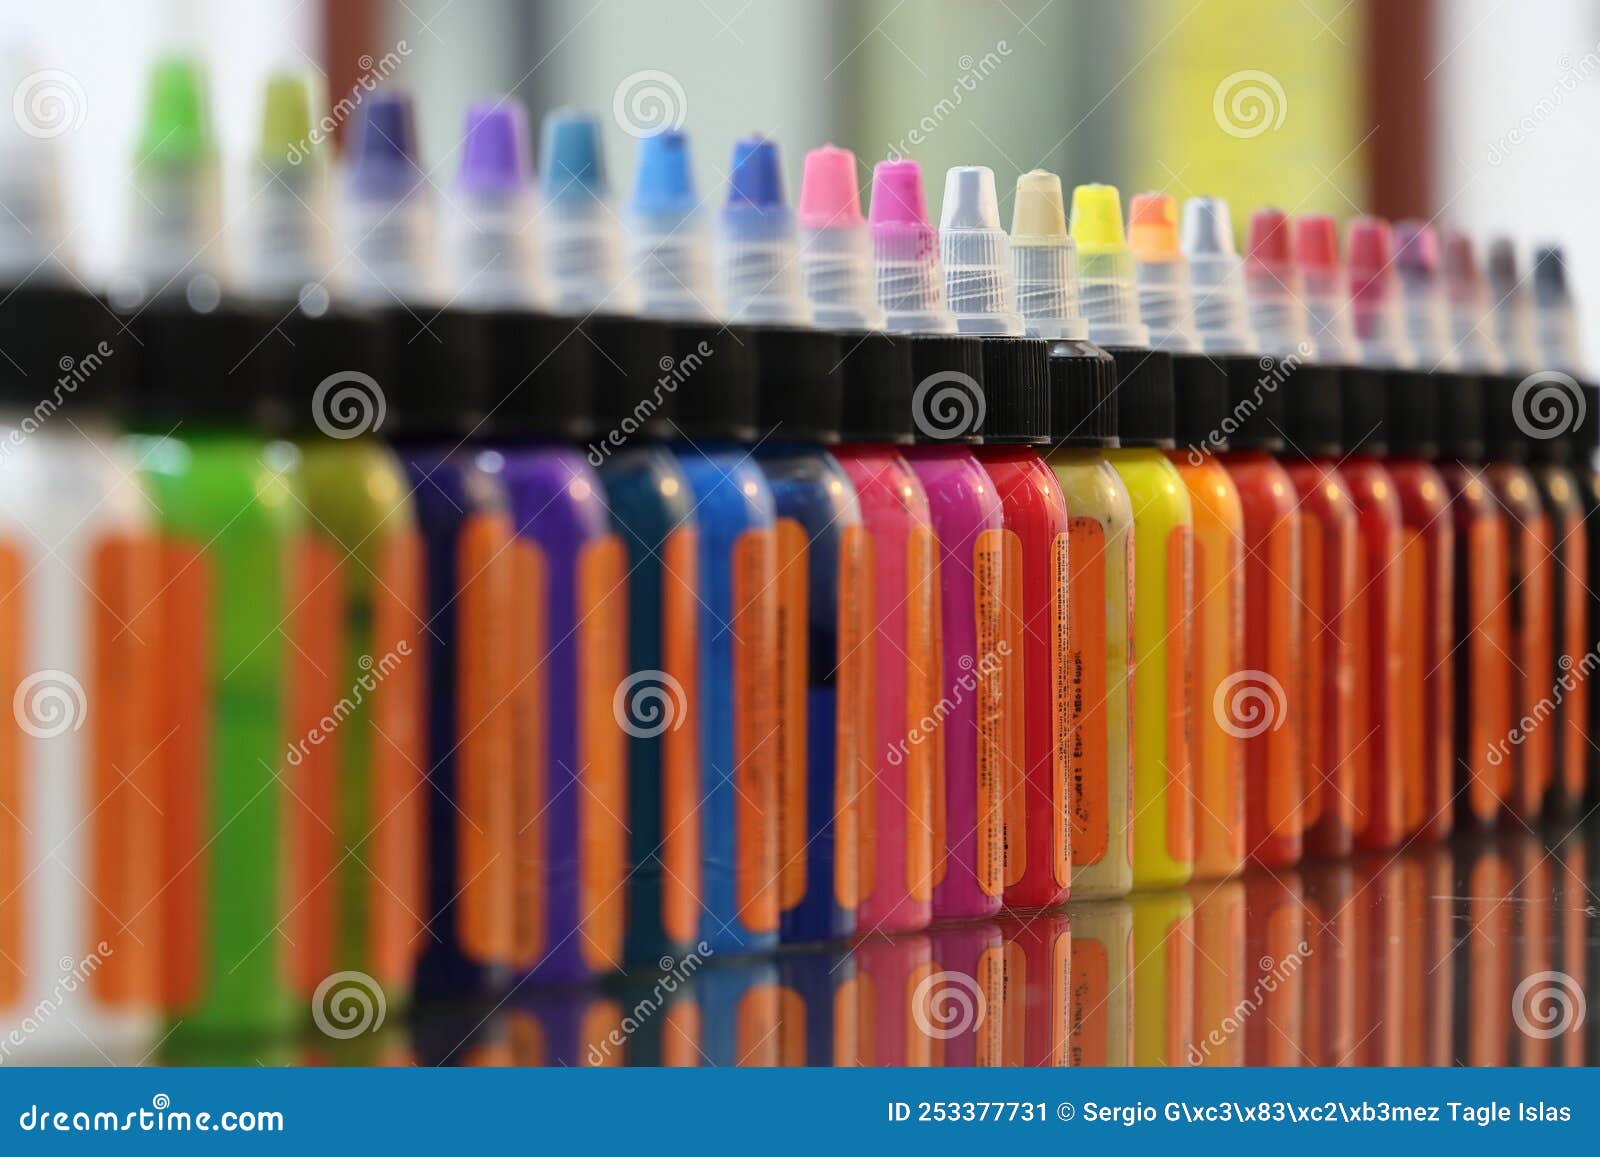 colored inks in plastic containers formed in a row and bokeh background